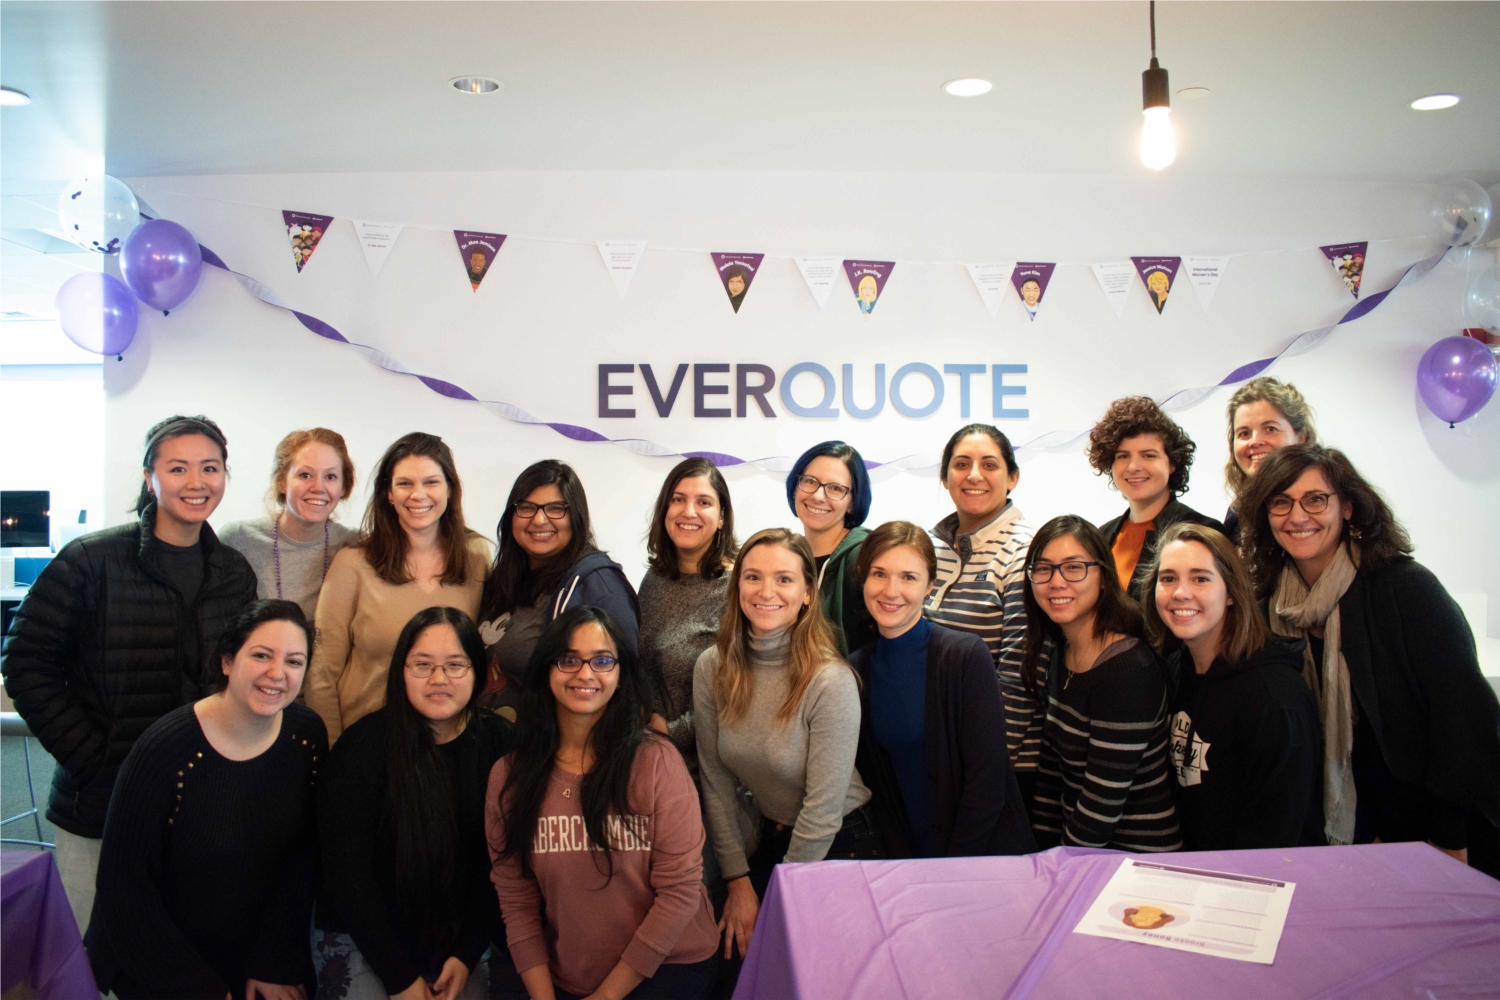 One of our longest standing Employee Resource Groups is our Women's Forum. Women's Forum holds monthly events including inviting speakers in, social events, professional development, and lunch discussions. This photo is from our annual International Women's Day celebration which is a day full of events celebrating the Women of EQ! 